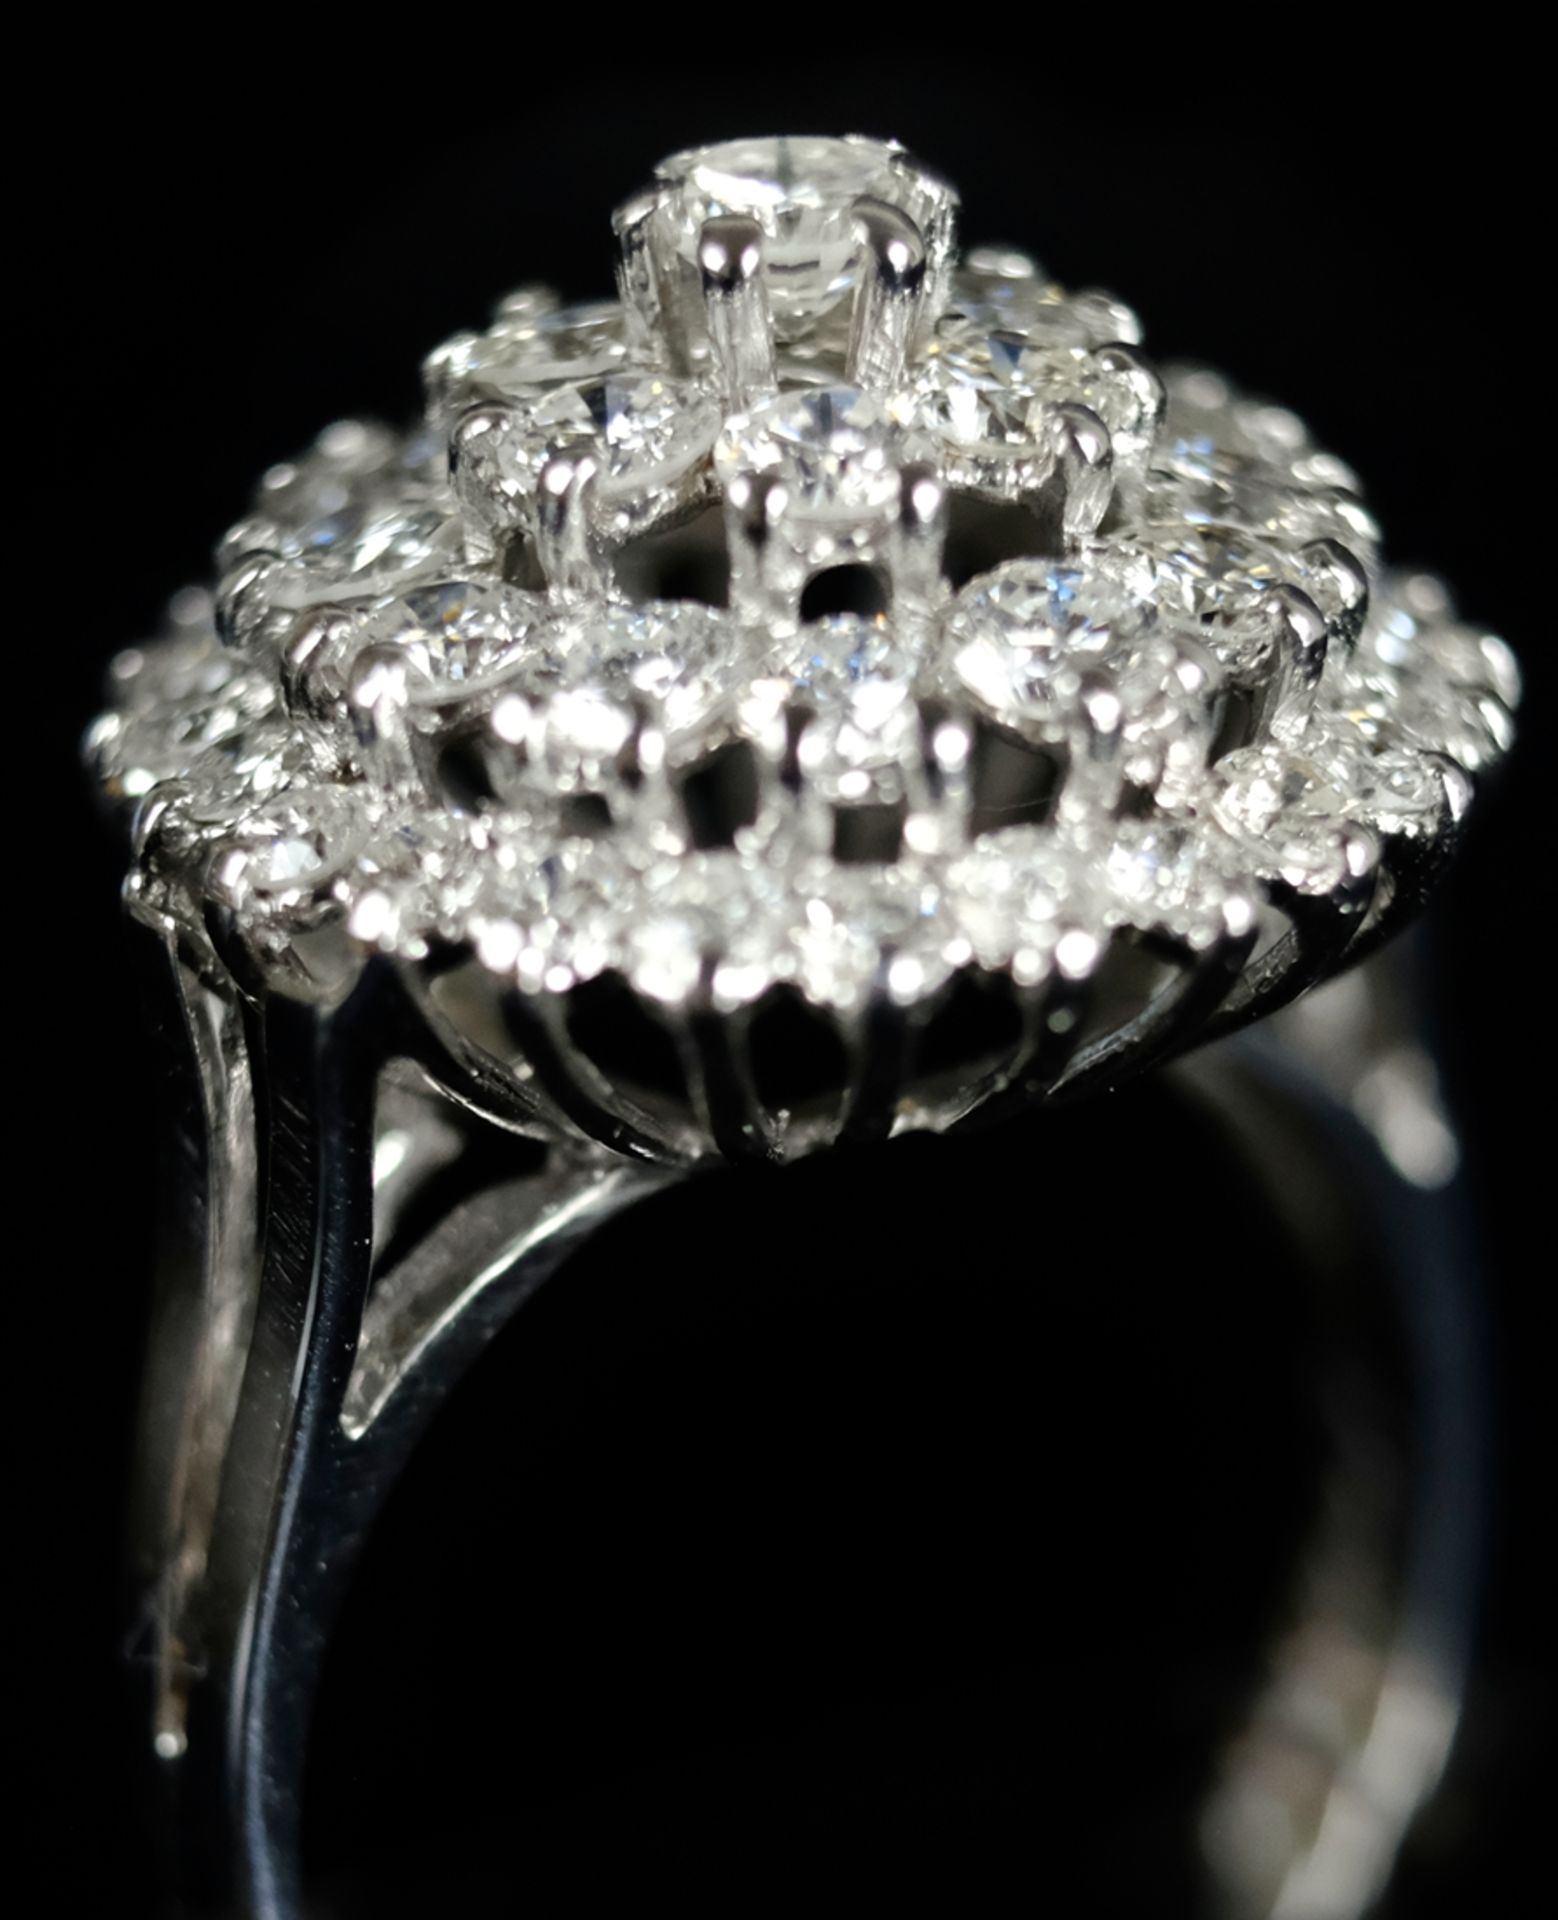 Flower ring in stepped design, set all around with brilliant-cut diamonds, total around 1.99ct, app